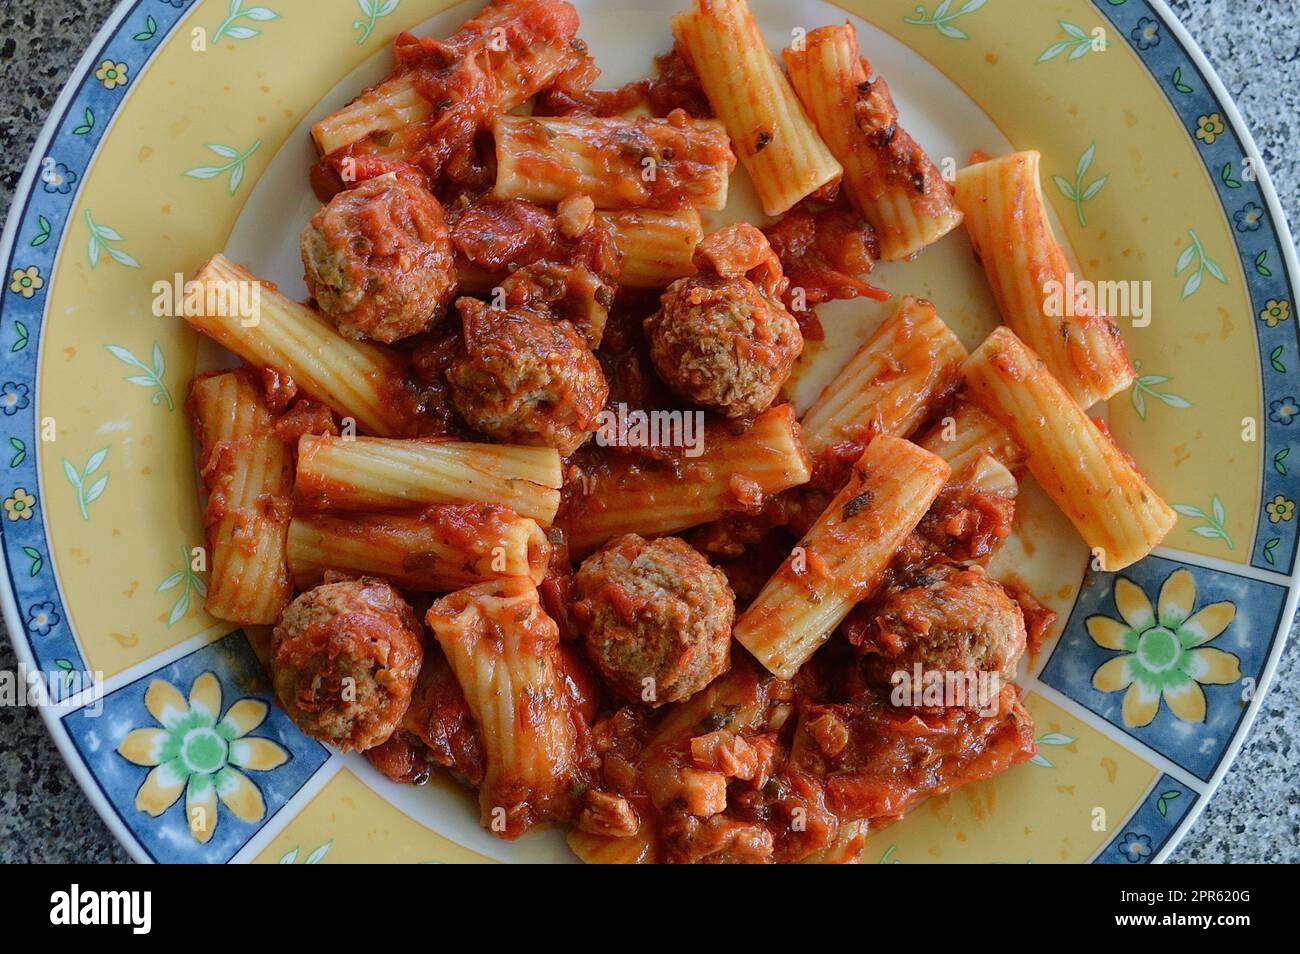 Rigatoni served on a colorful plate Stock Photo